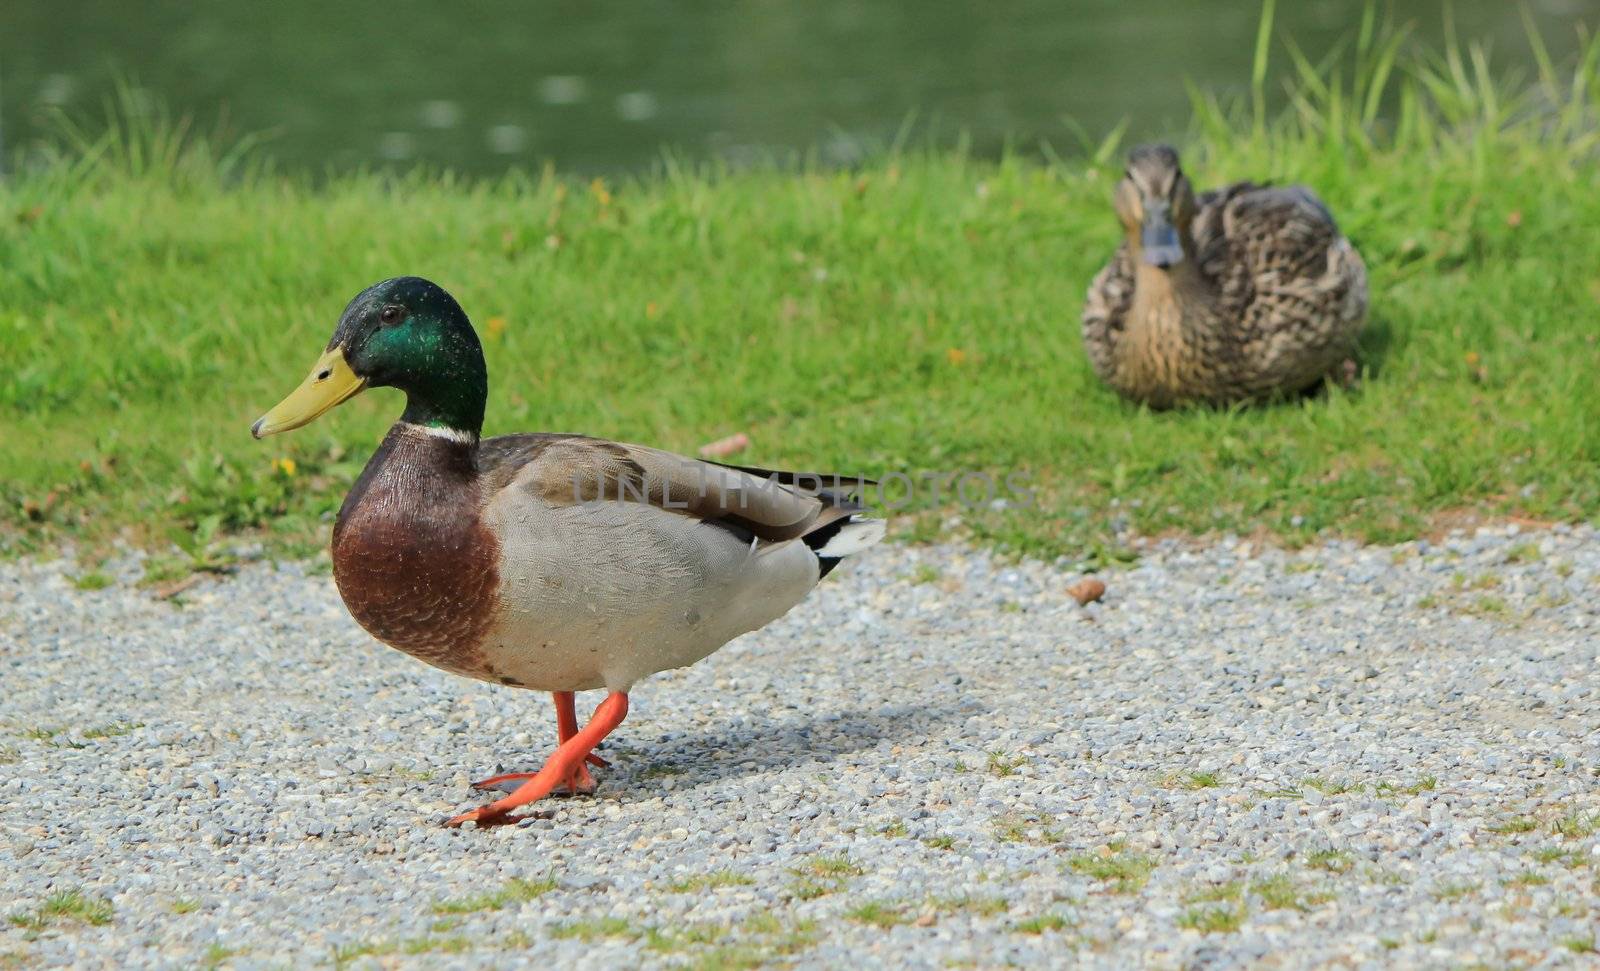 Couple of mallard ducks, female lying on the grass and male walking in gront of her on a path, next to a lake